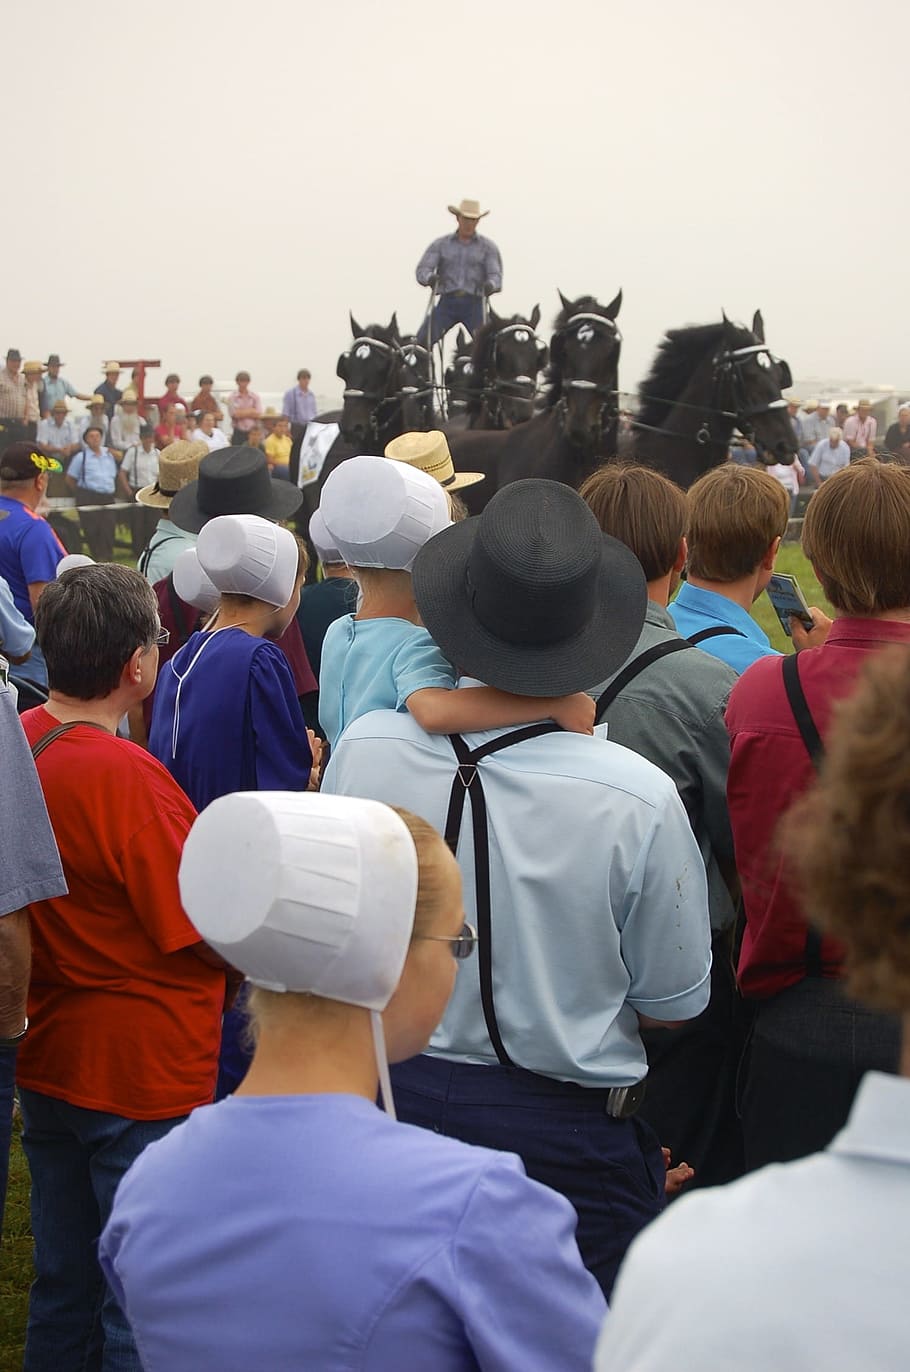 Amish, Persons, Man, Women, People, amish gathering, amish people, HD wallpaper